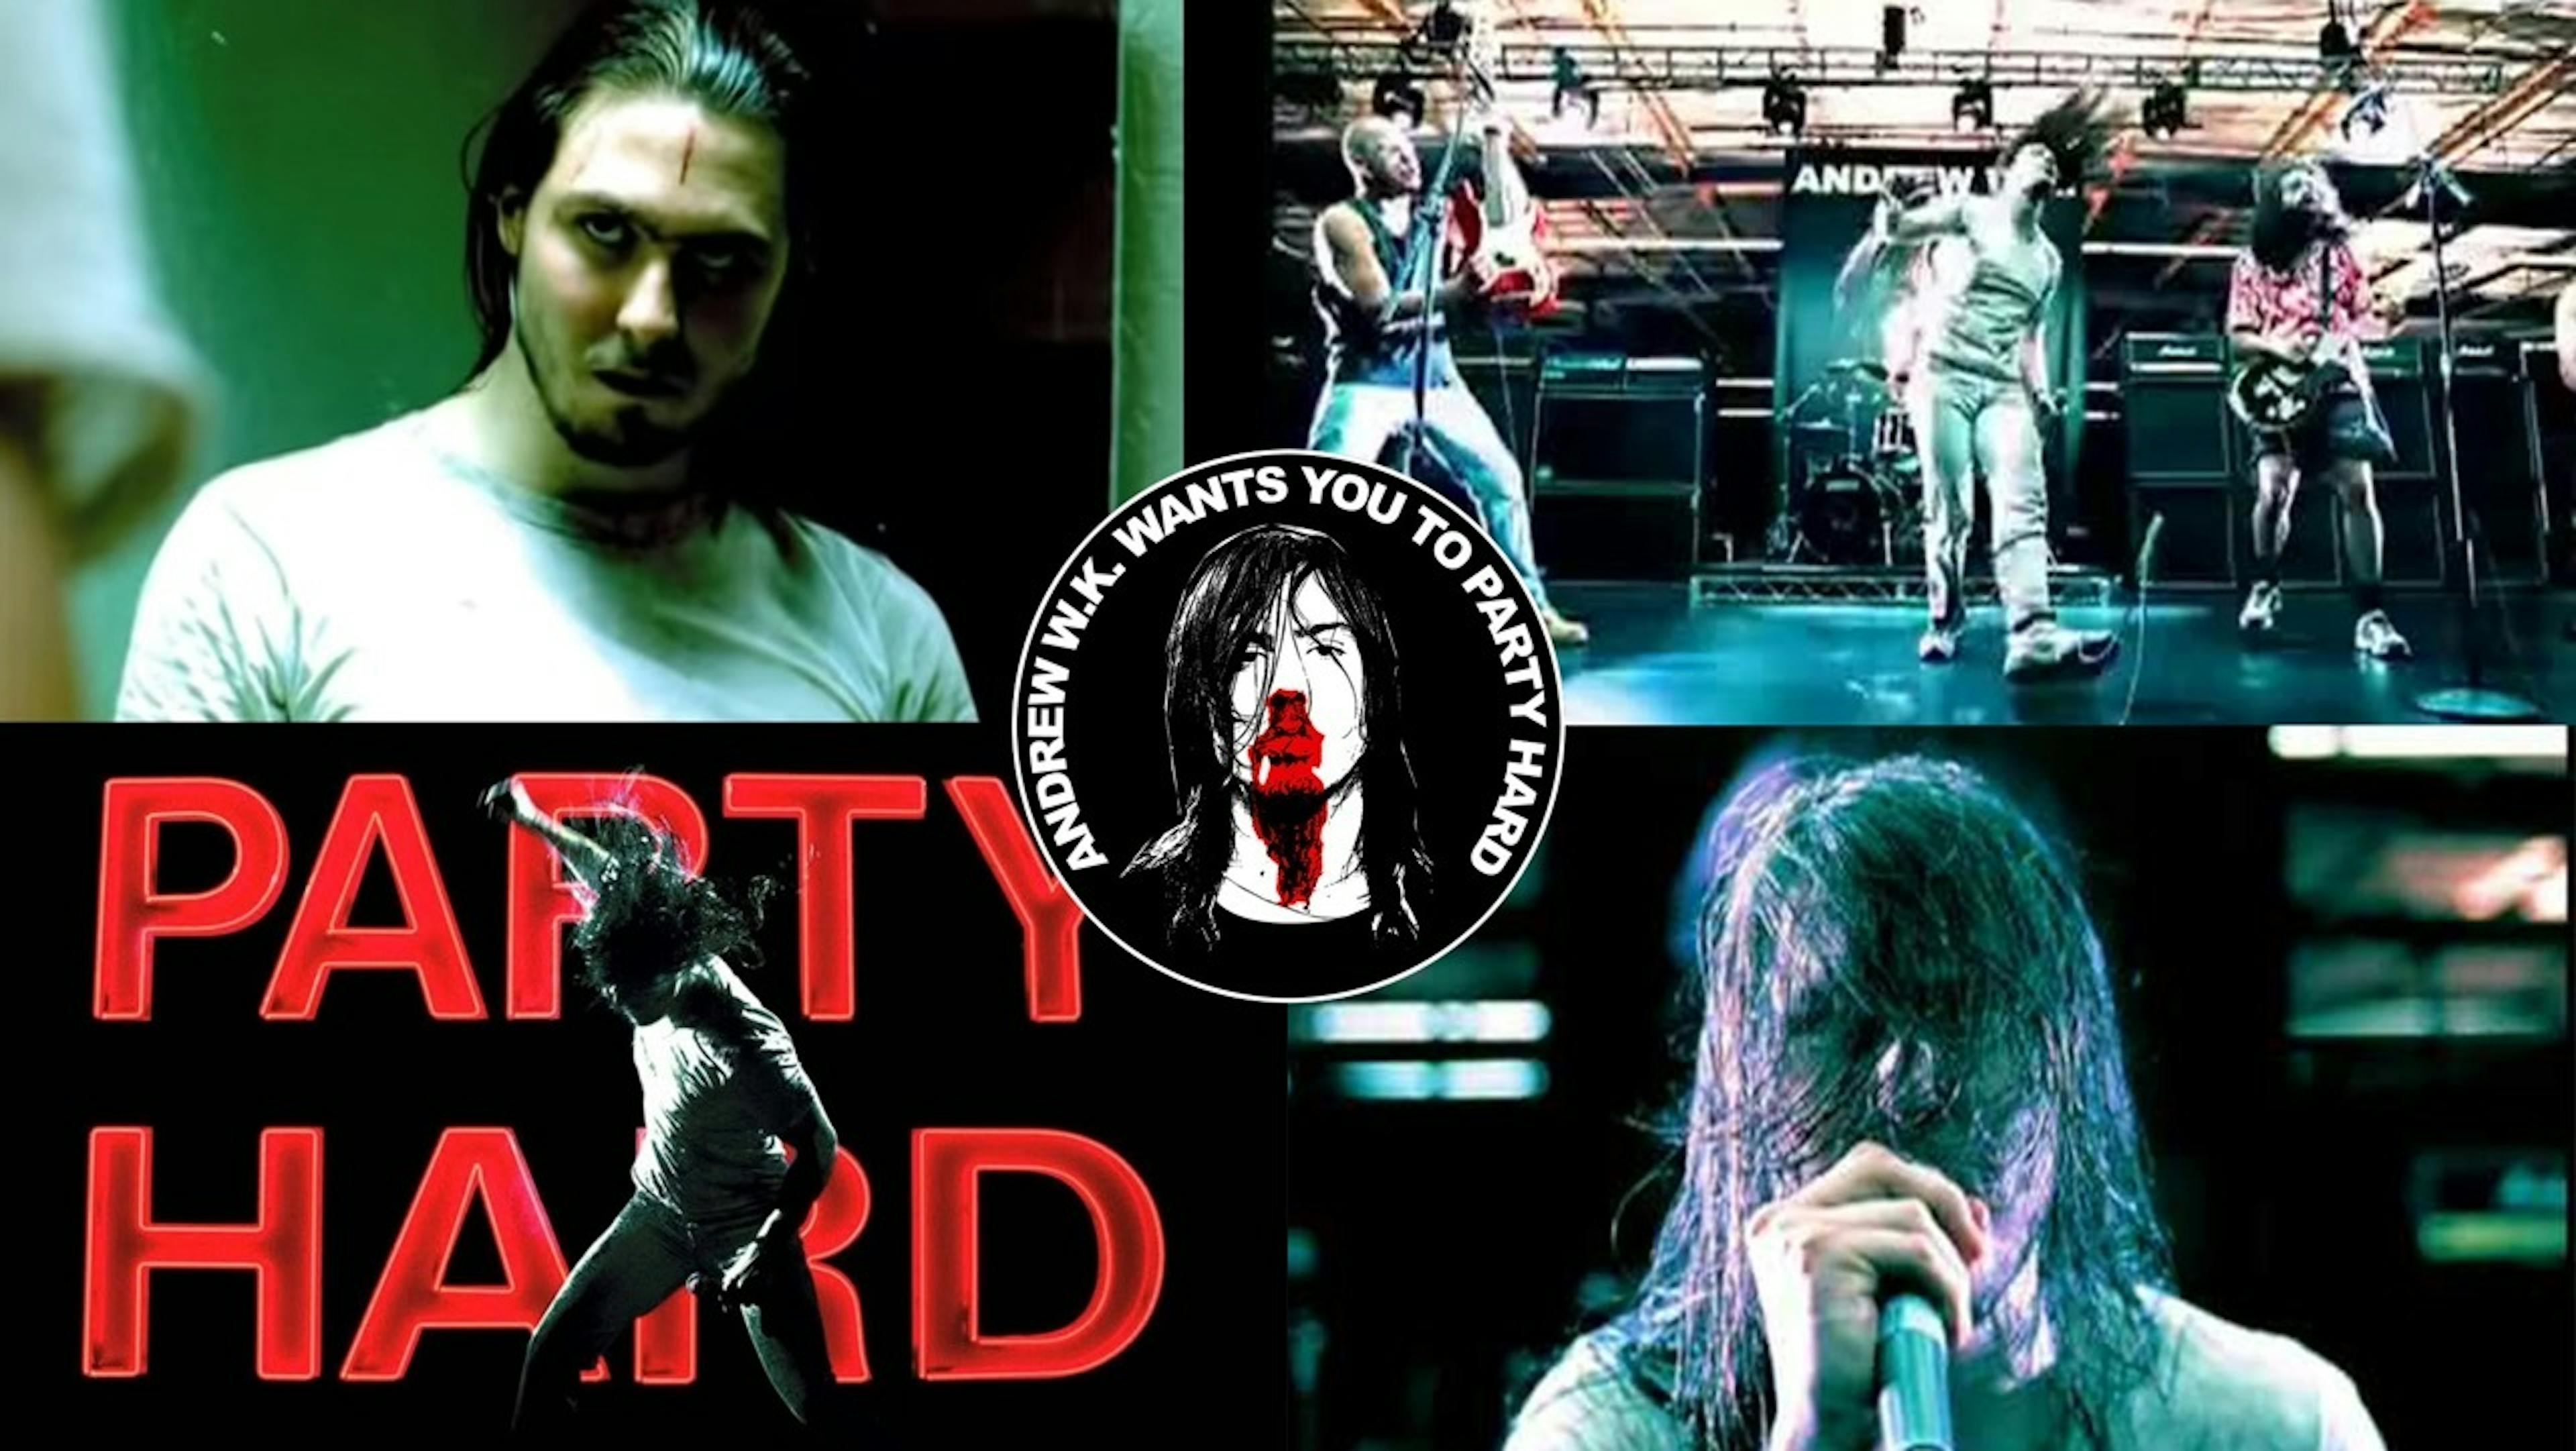 A Deep Dive Into The Video For Party Hard By Andrew W.K.